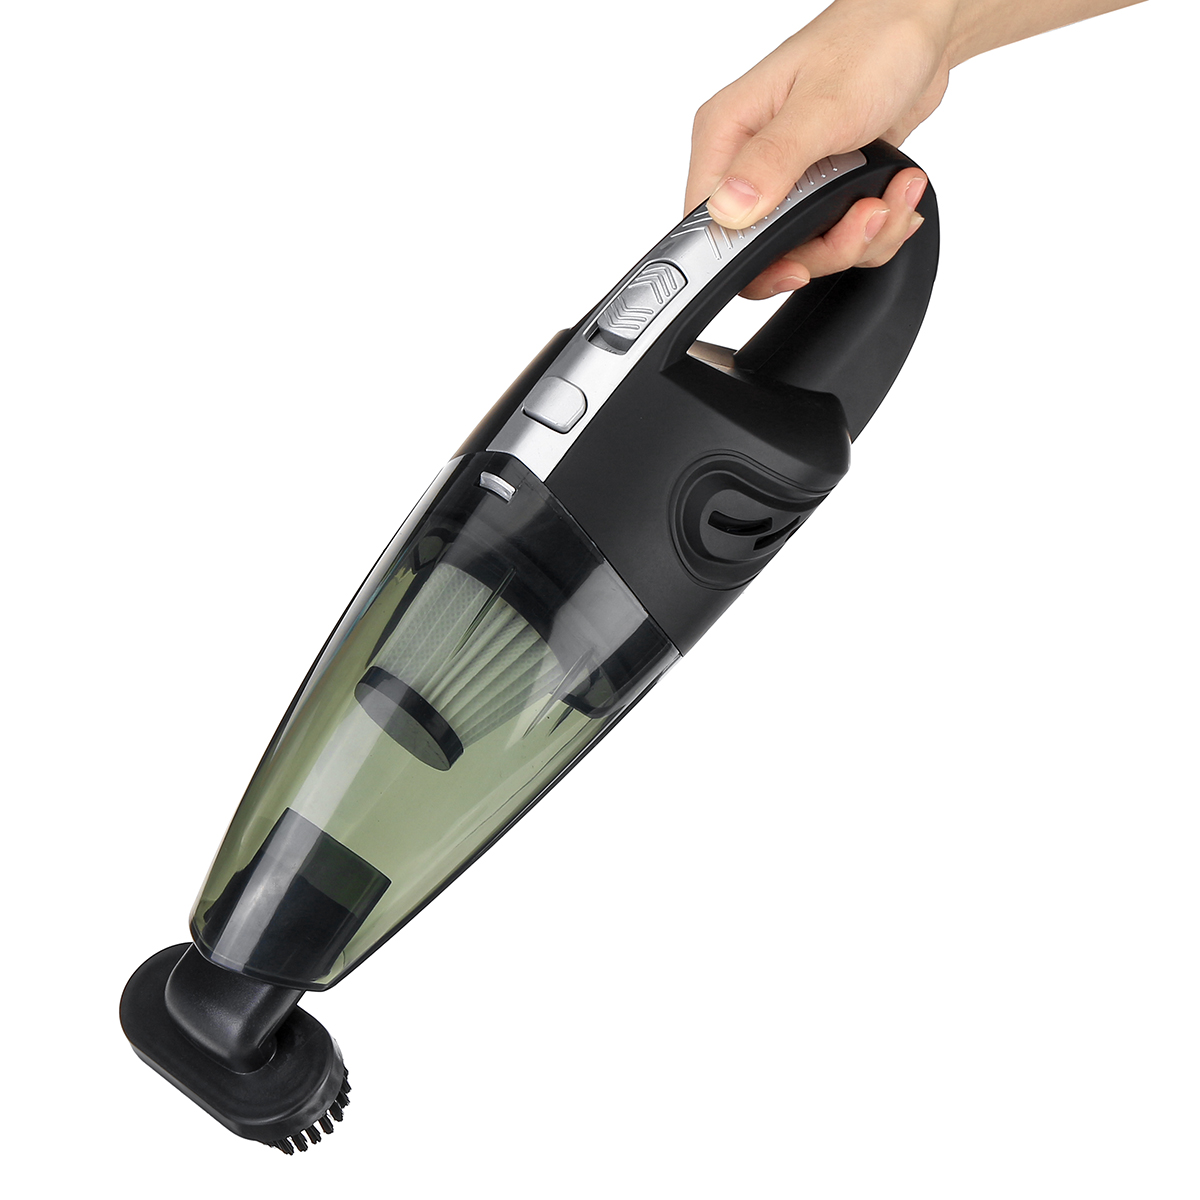 

120W Cordless Portable Rechargeable Vacuum Cleaner Wet Dry For Car Home